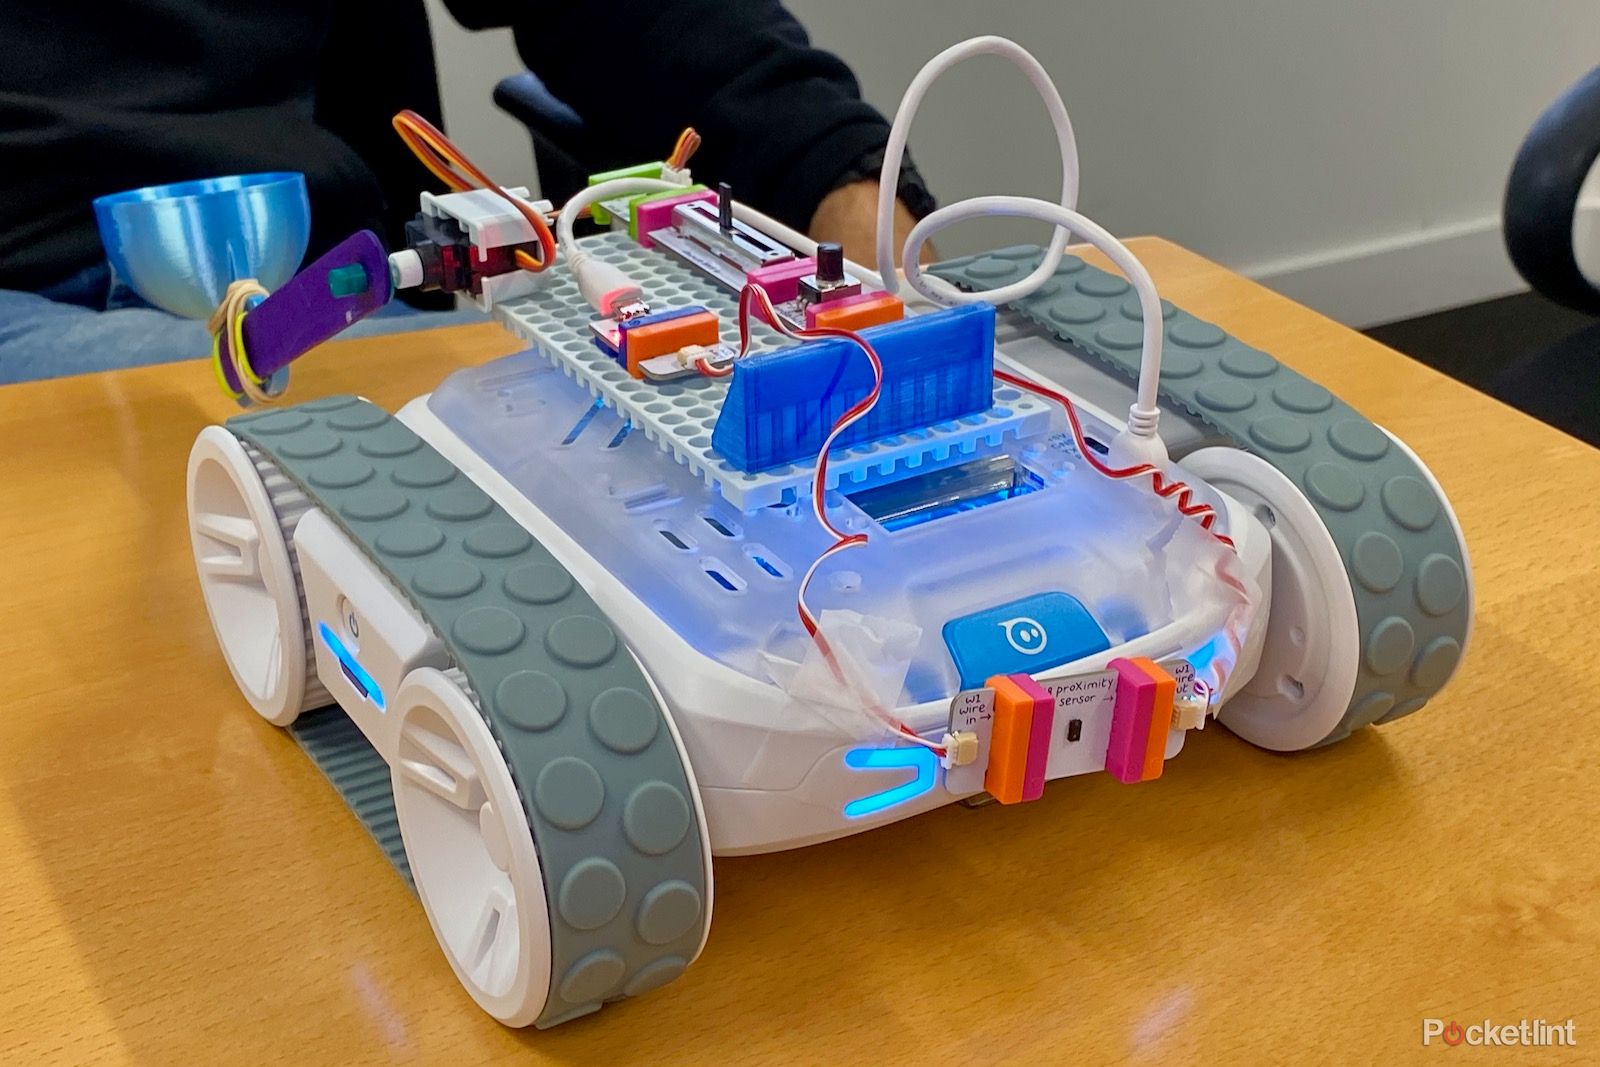 Sphero wants you to hack its new RVR robot image 1